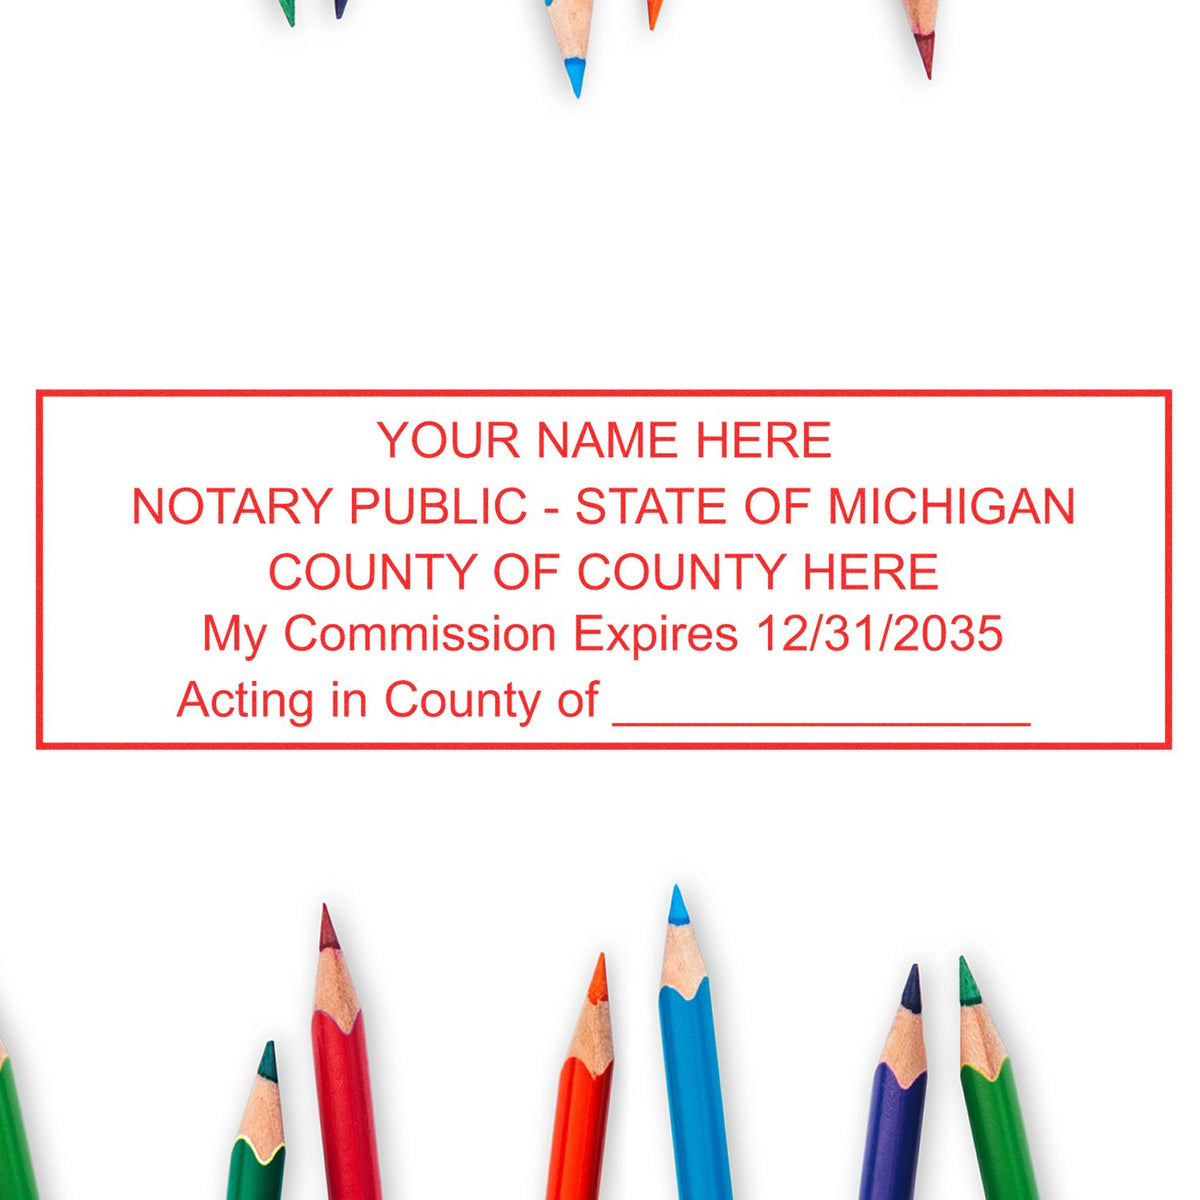 The Heavy-Duty Michigan Rectangular Notary Stamp stamp impression comes to life with a crisp, detailed photo on paper - showcasing true professional quality.